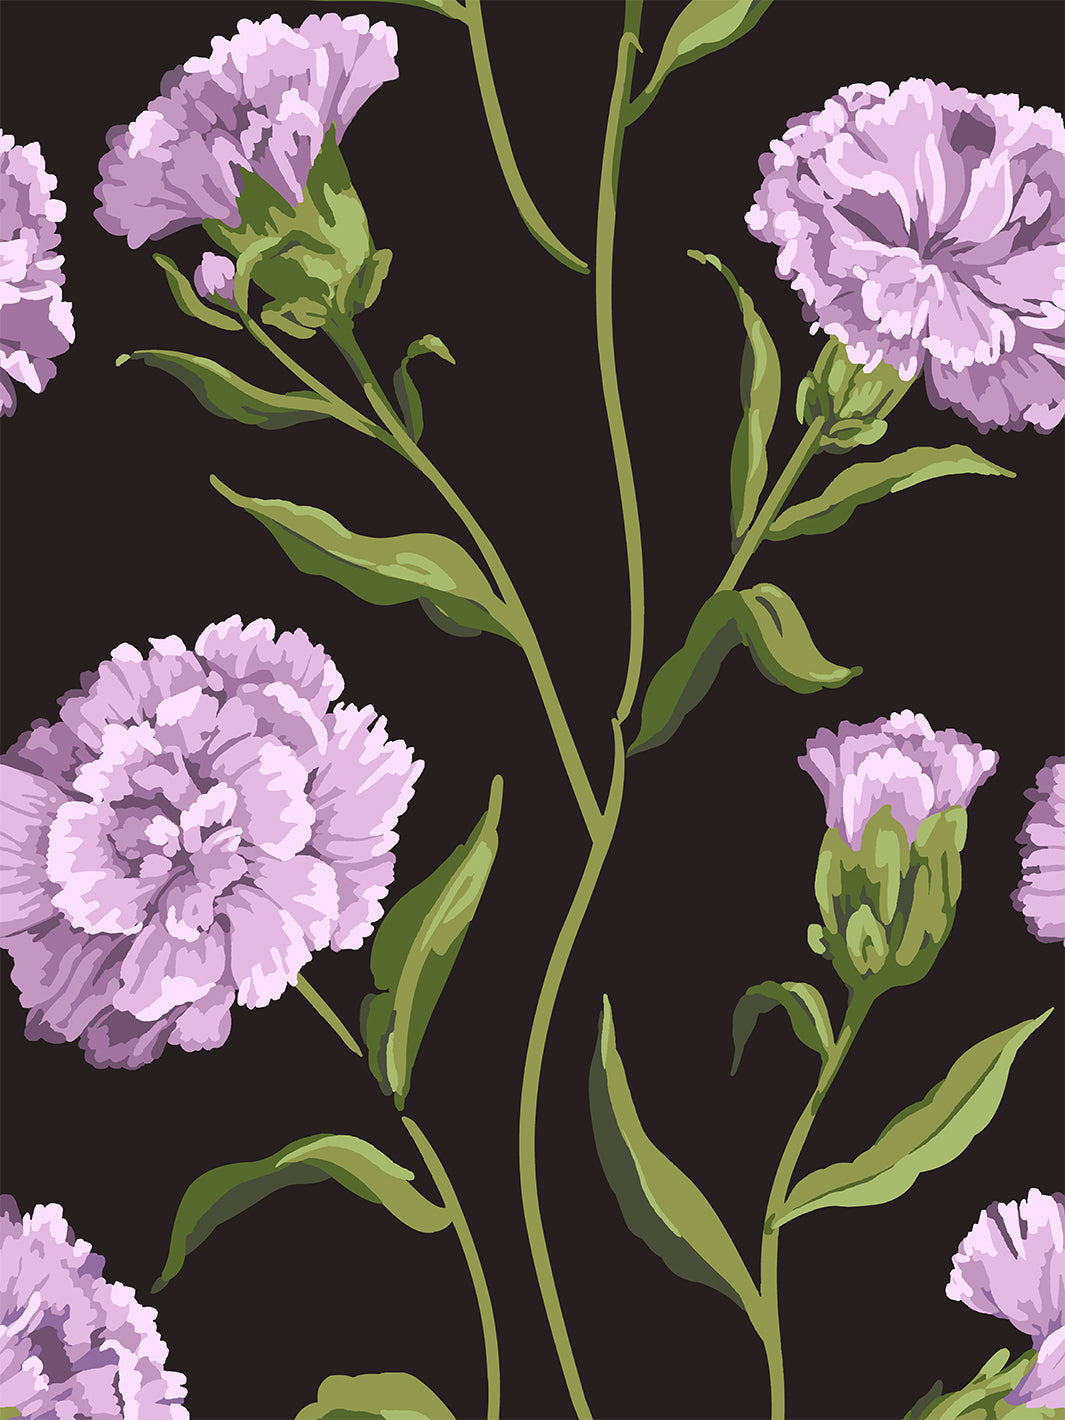 'Townhouse' Wallpaper by Sarah Jessica Parker - Lavender on Almost Black